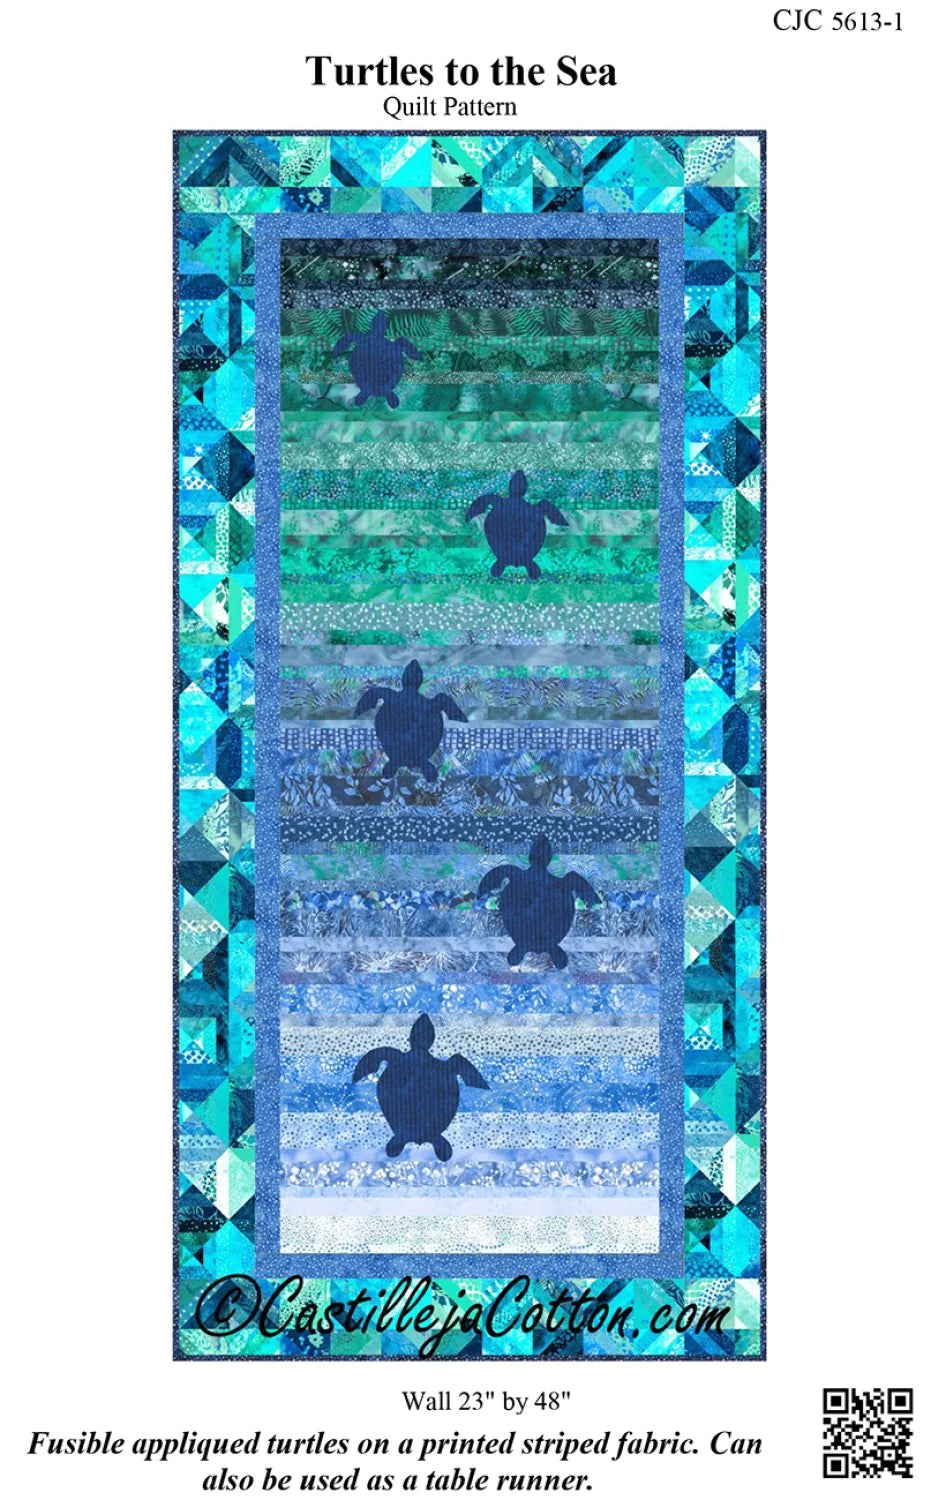 Turtles to the Sea Wall Hanging/Table Runner Quilt Kit